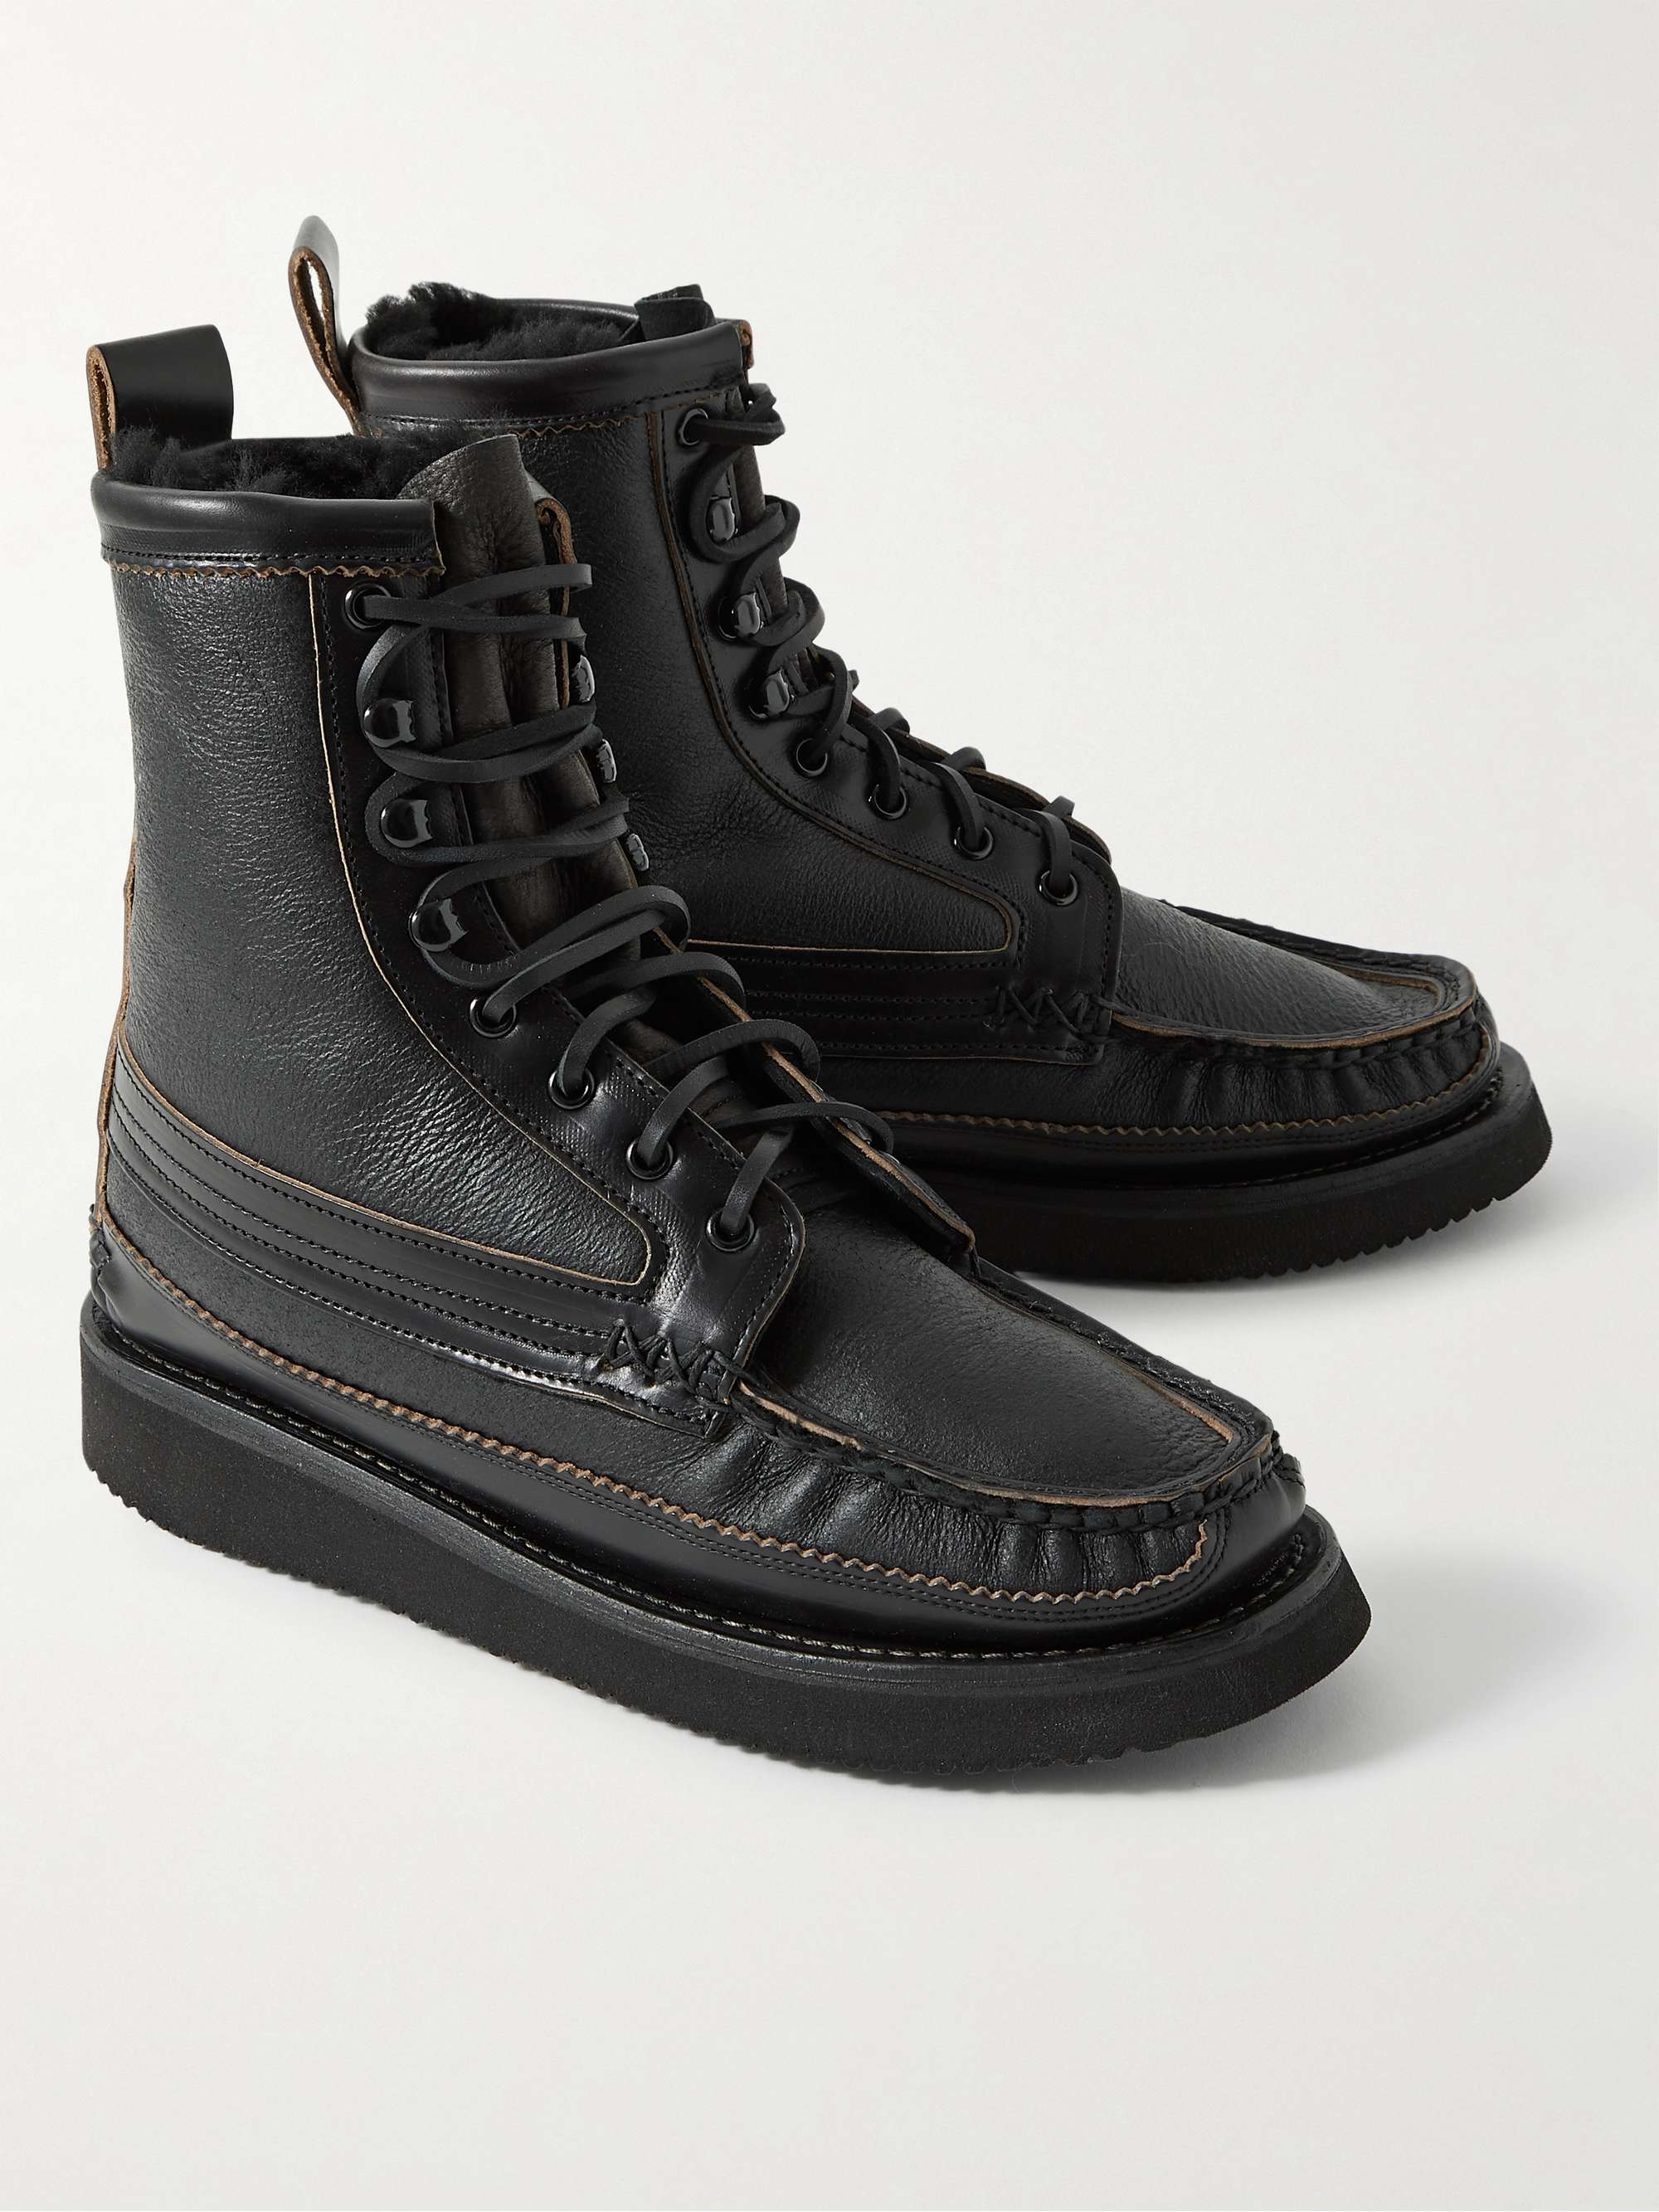 YUKETEN Maine Guide Shearling-Lined Leather Boots